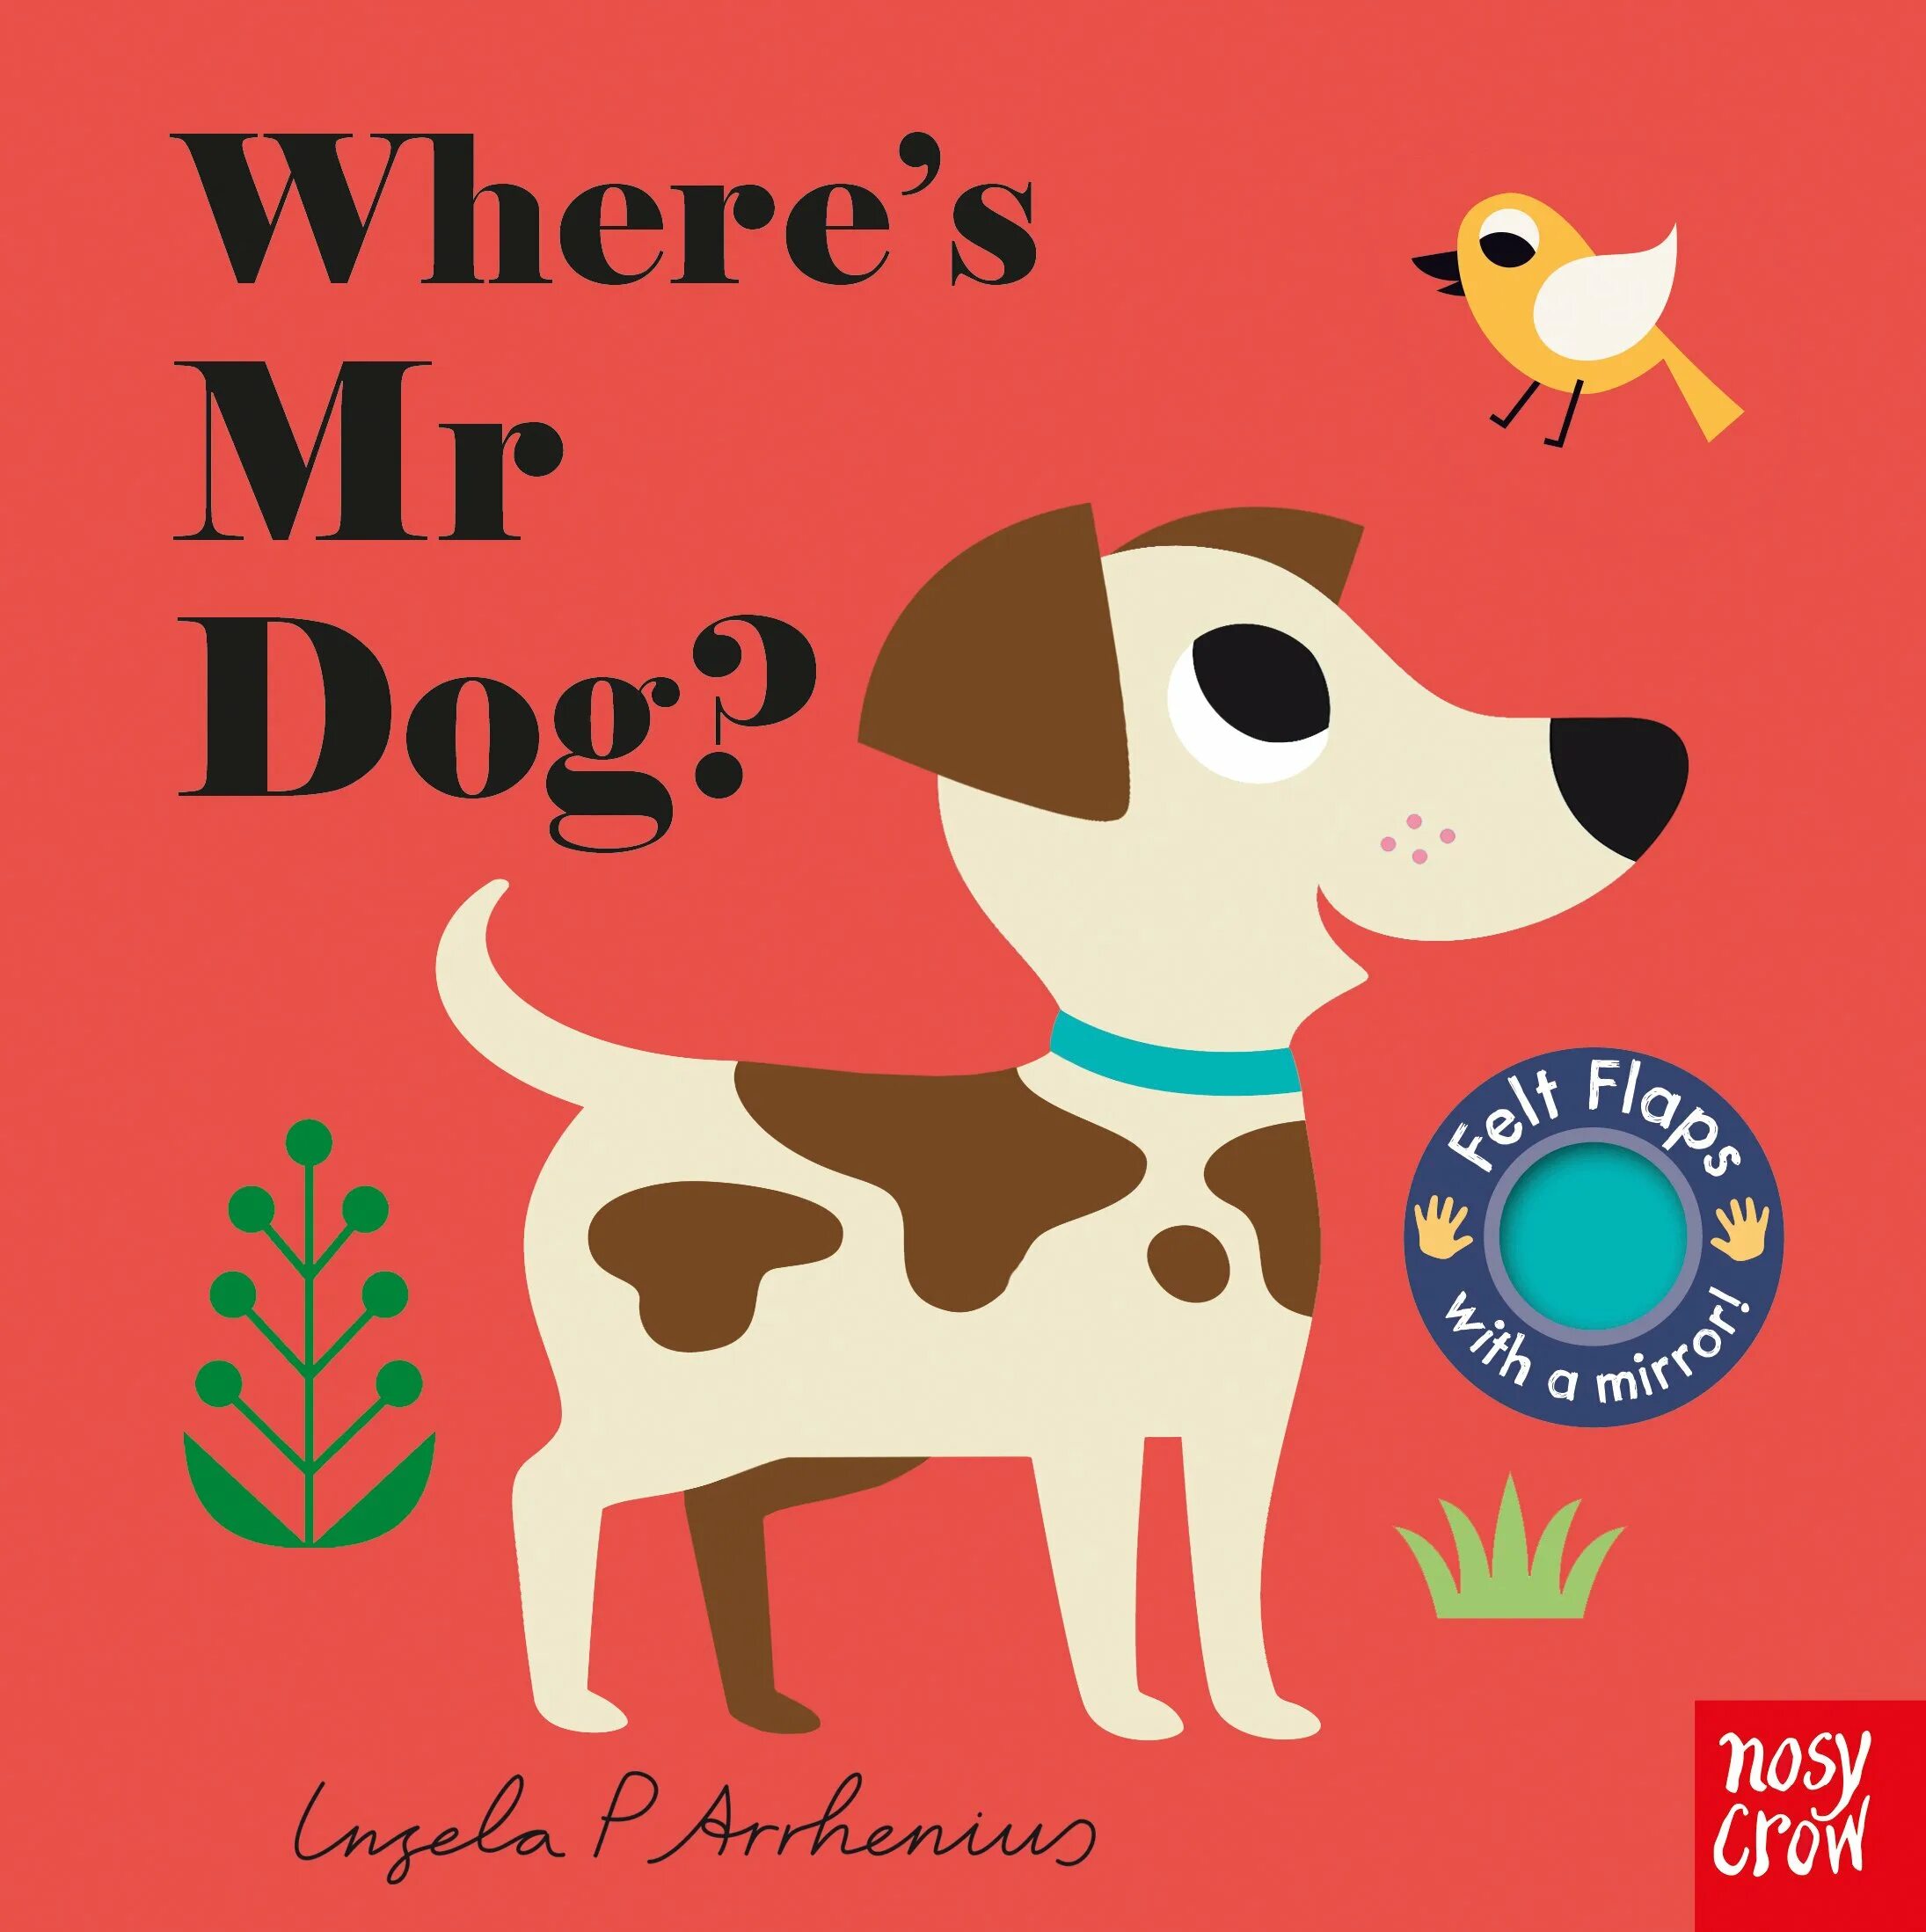 Book my dog. Where s the Dog. Mr Dog. Pet book. Don't Growl at the Dog book.